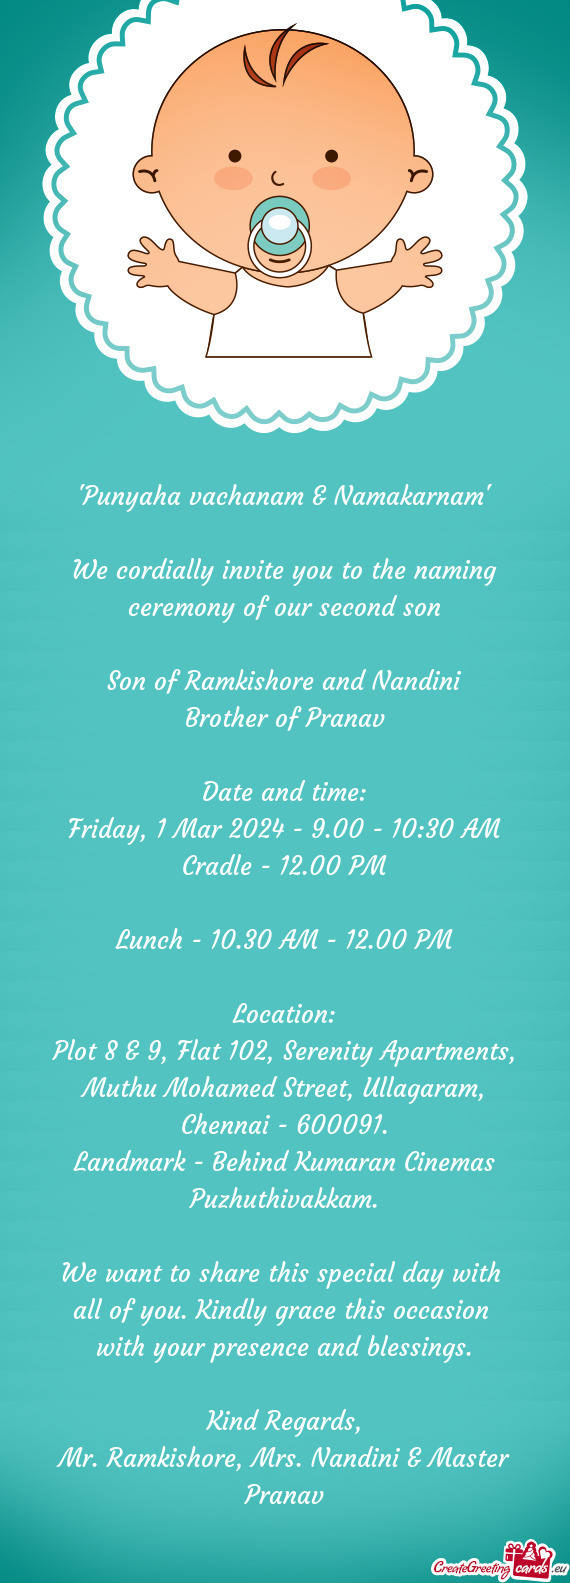 We cordially invite you to the naming ceremony of our second son